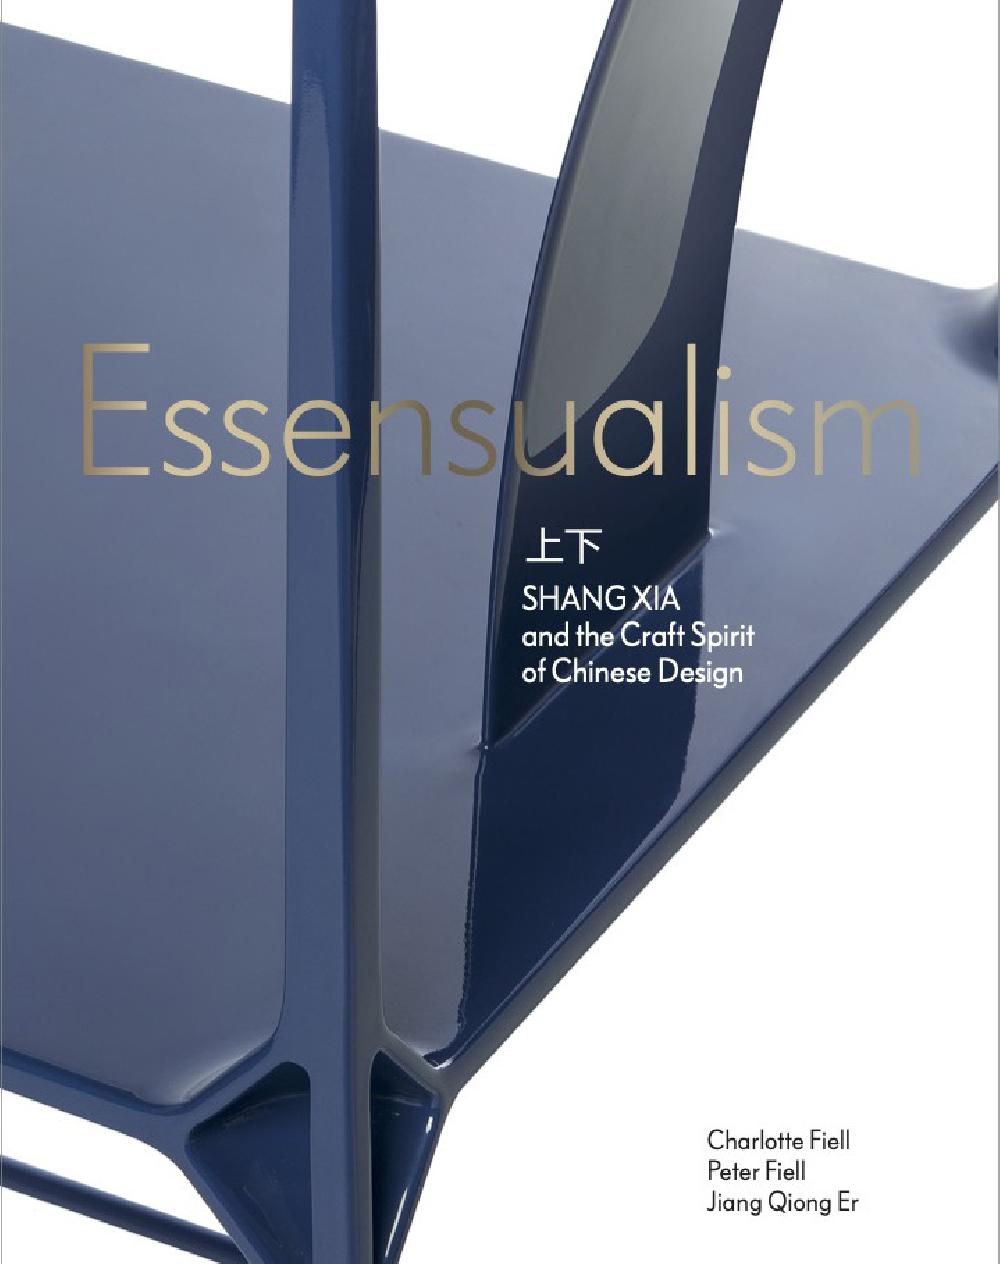 Essensualism - Shang Xia and The Craft Spirit of Contemporary Chinese Design